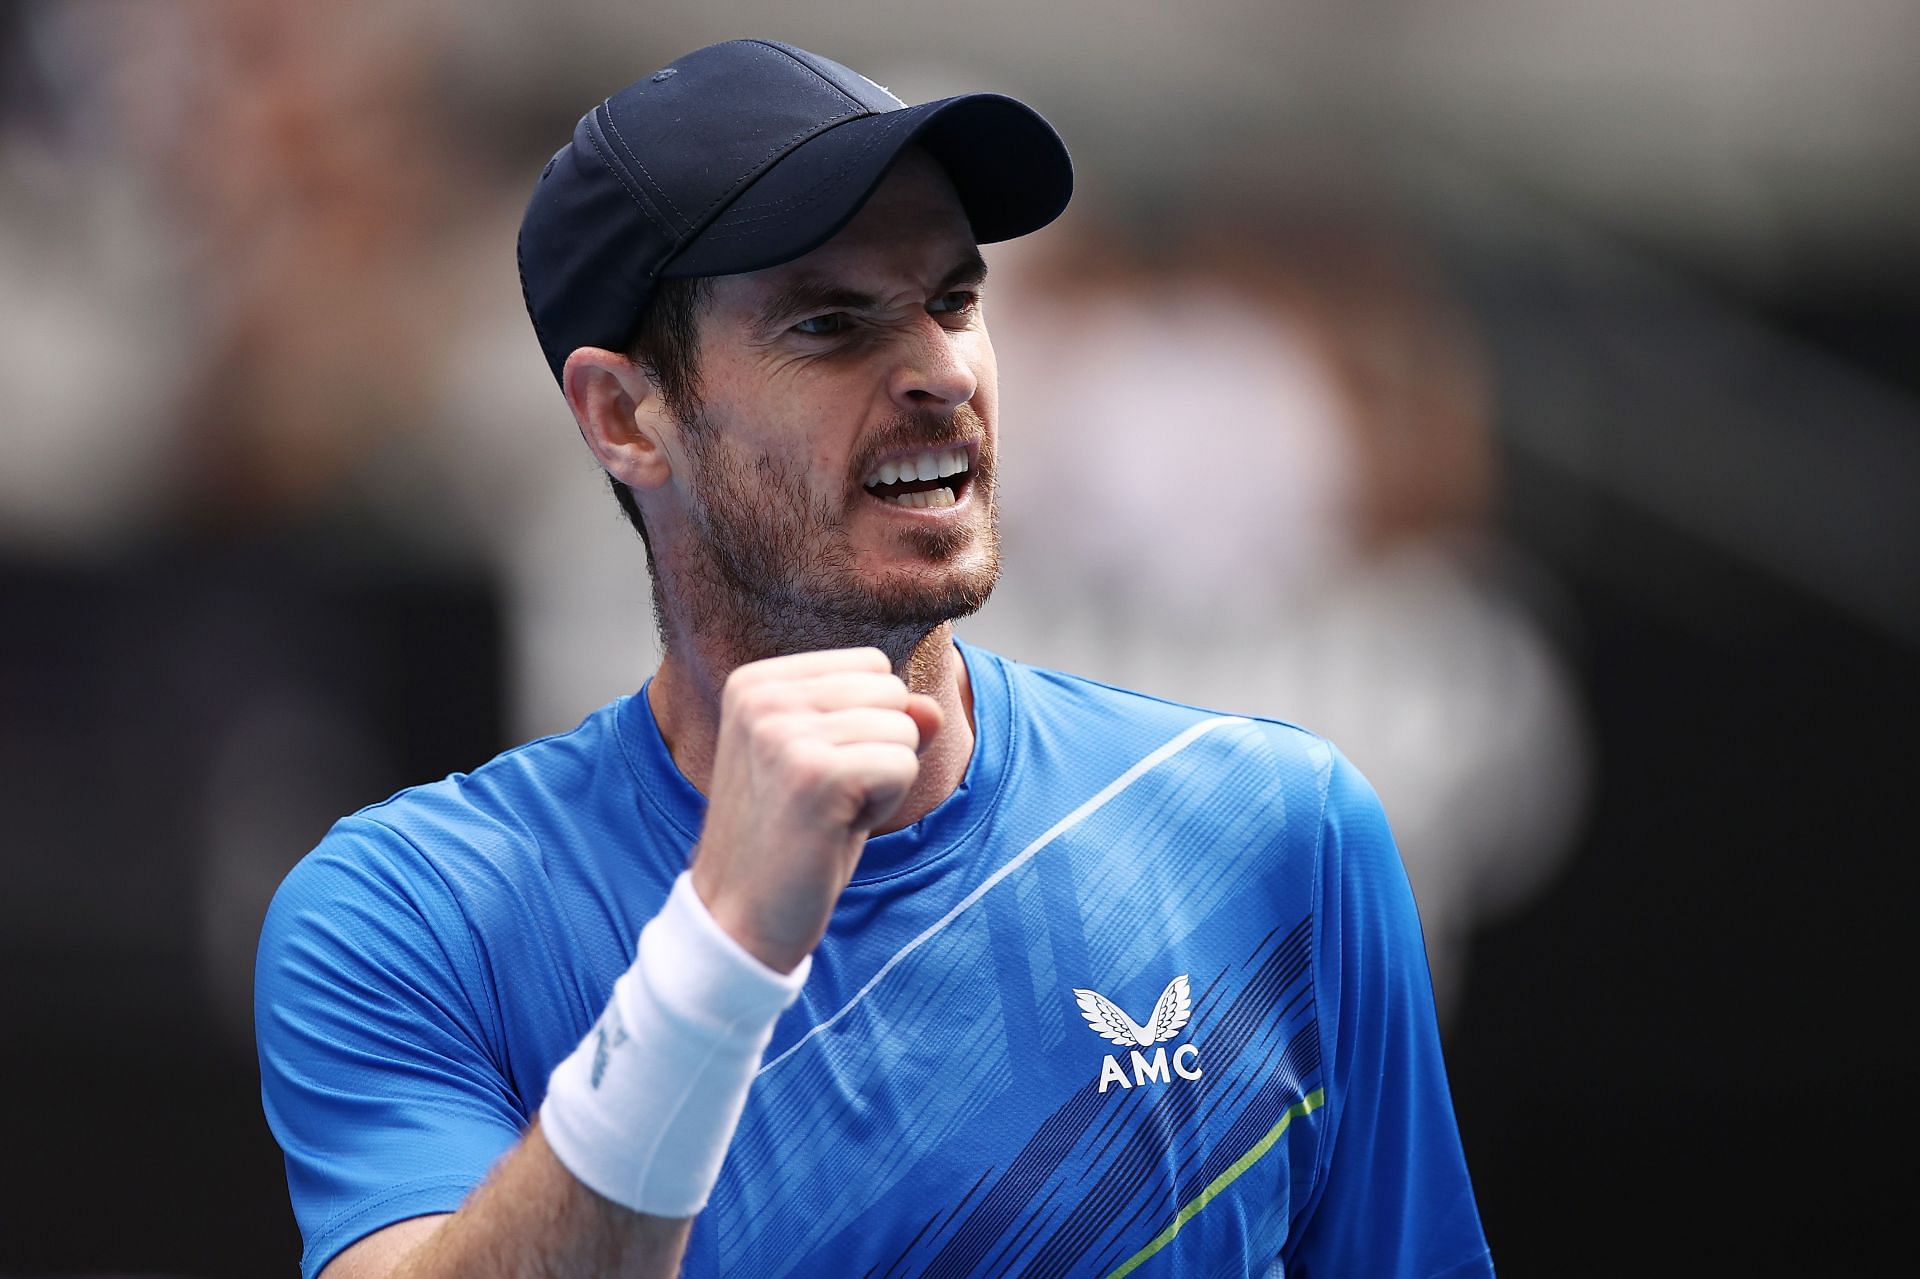 Andy Murray has broken into the top 100 for the first time in almost four years